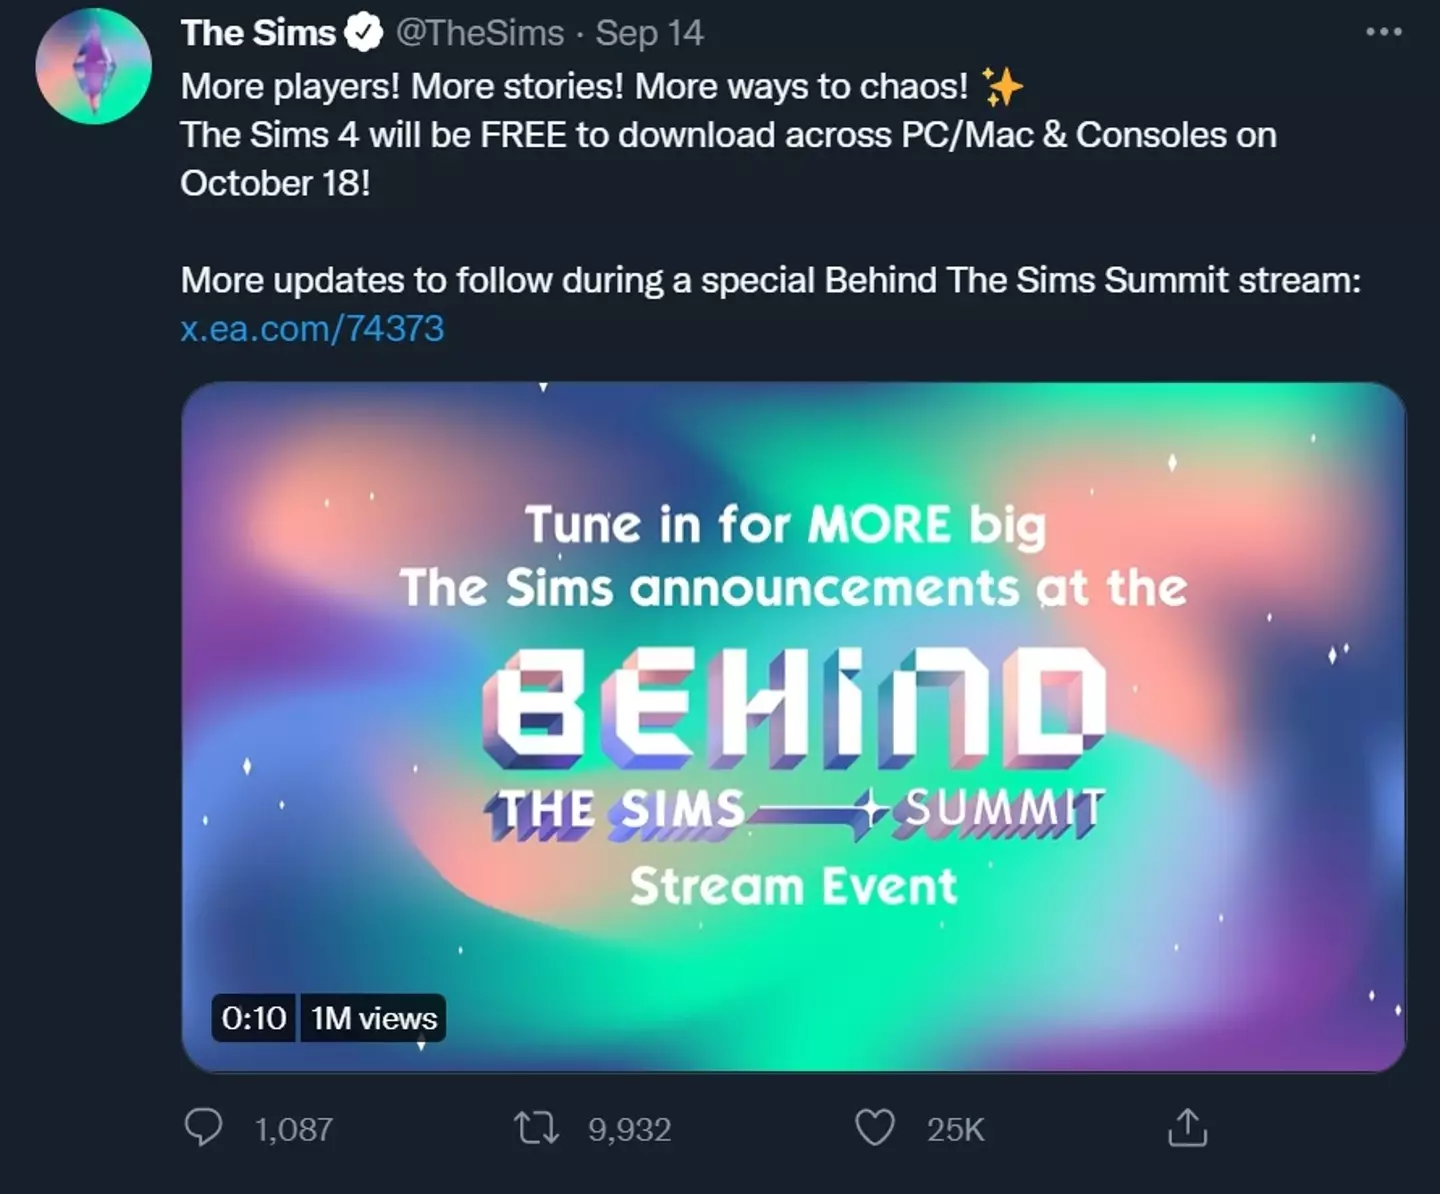 More info about The Sims going free to play will be revealed during a special stream.